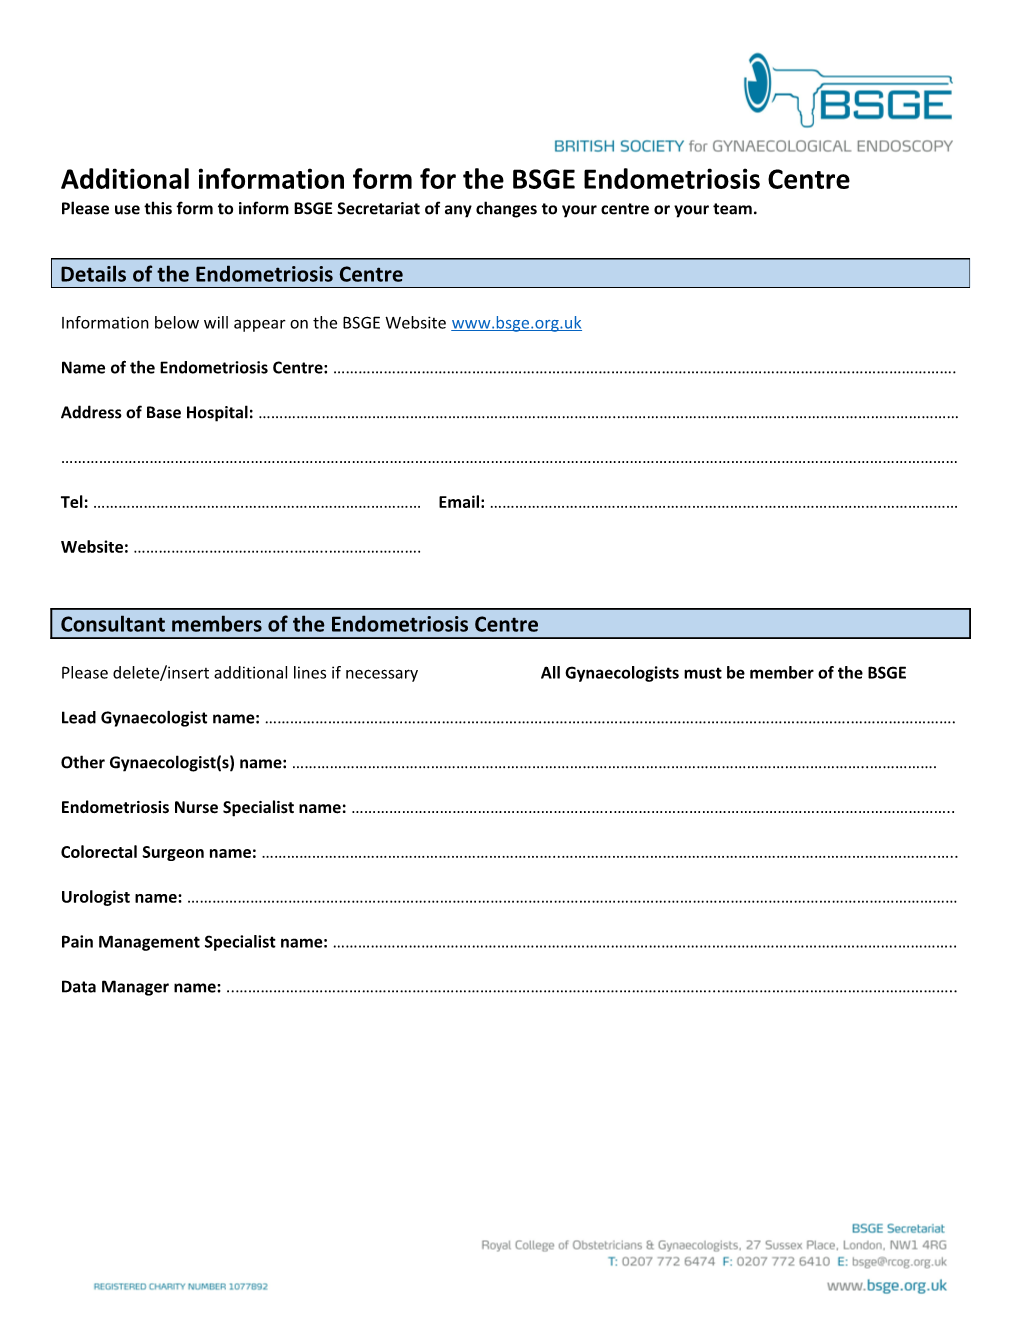 Additional Information Form for the BSGE Endometriosis Centre